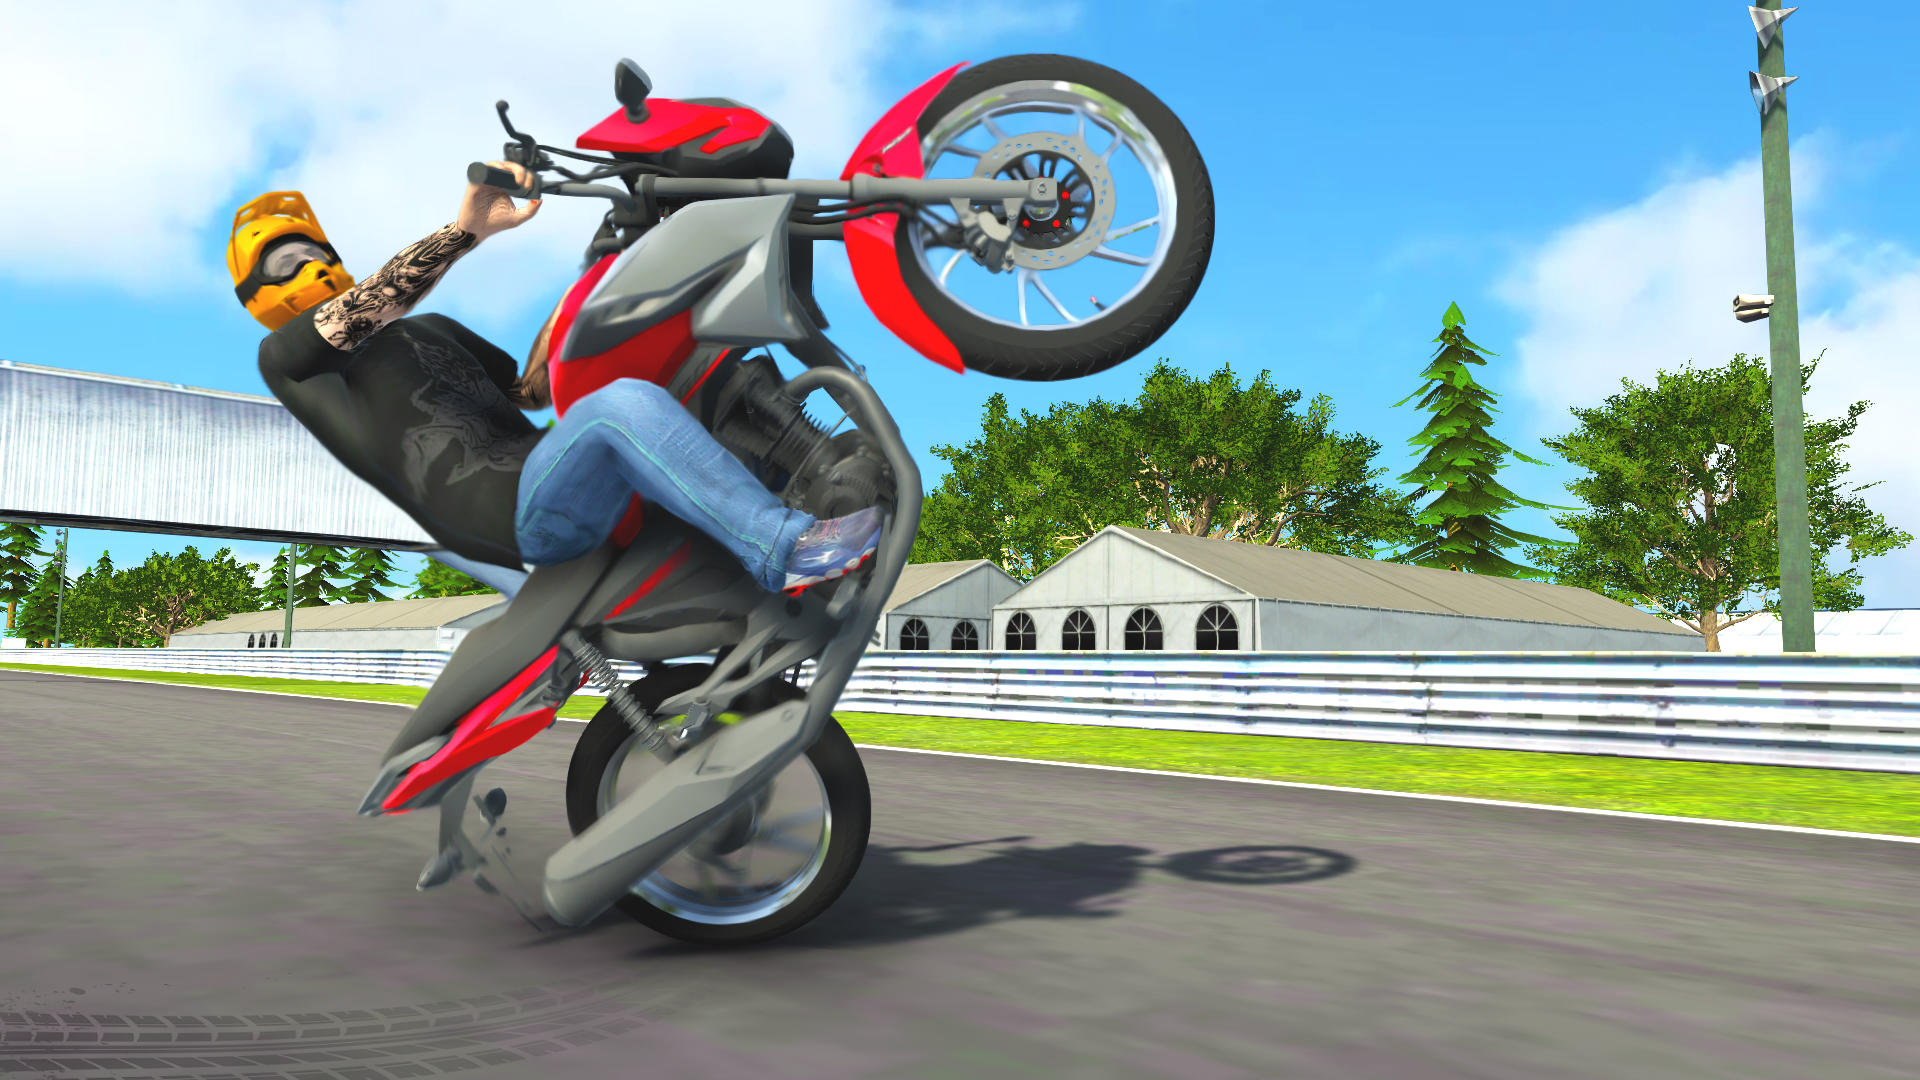 MX Grau Freestyle Motocross android iOS apk download for free-TapTap